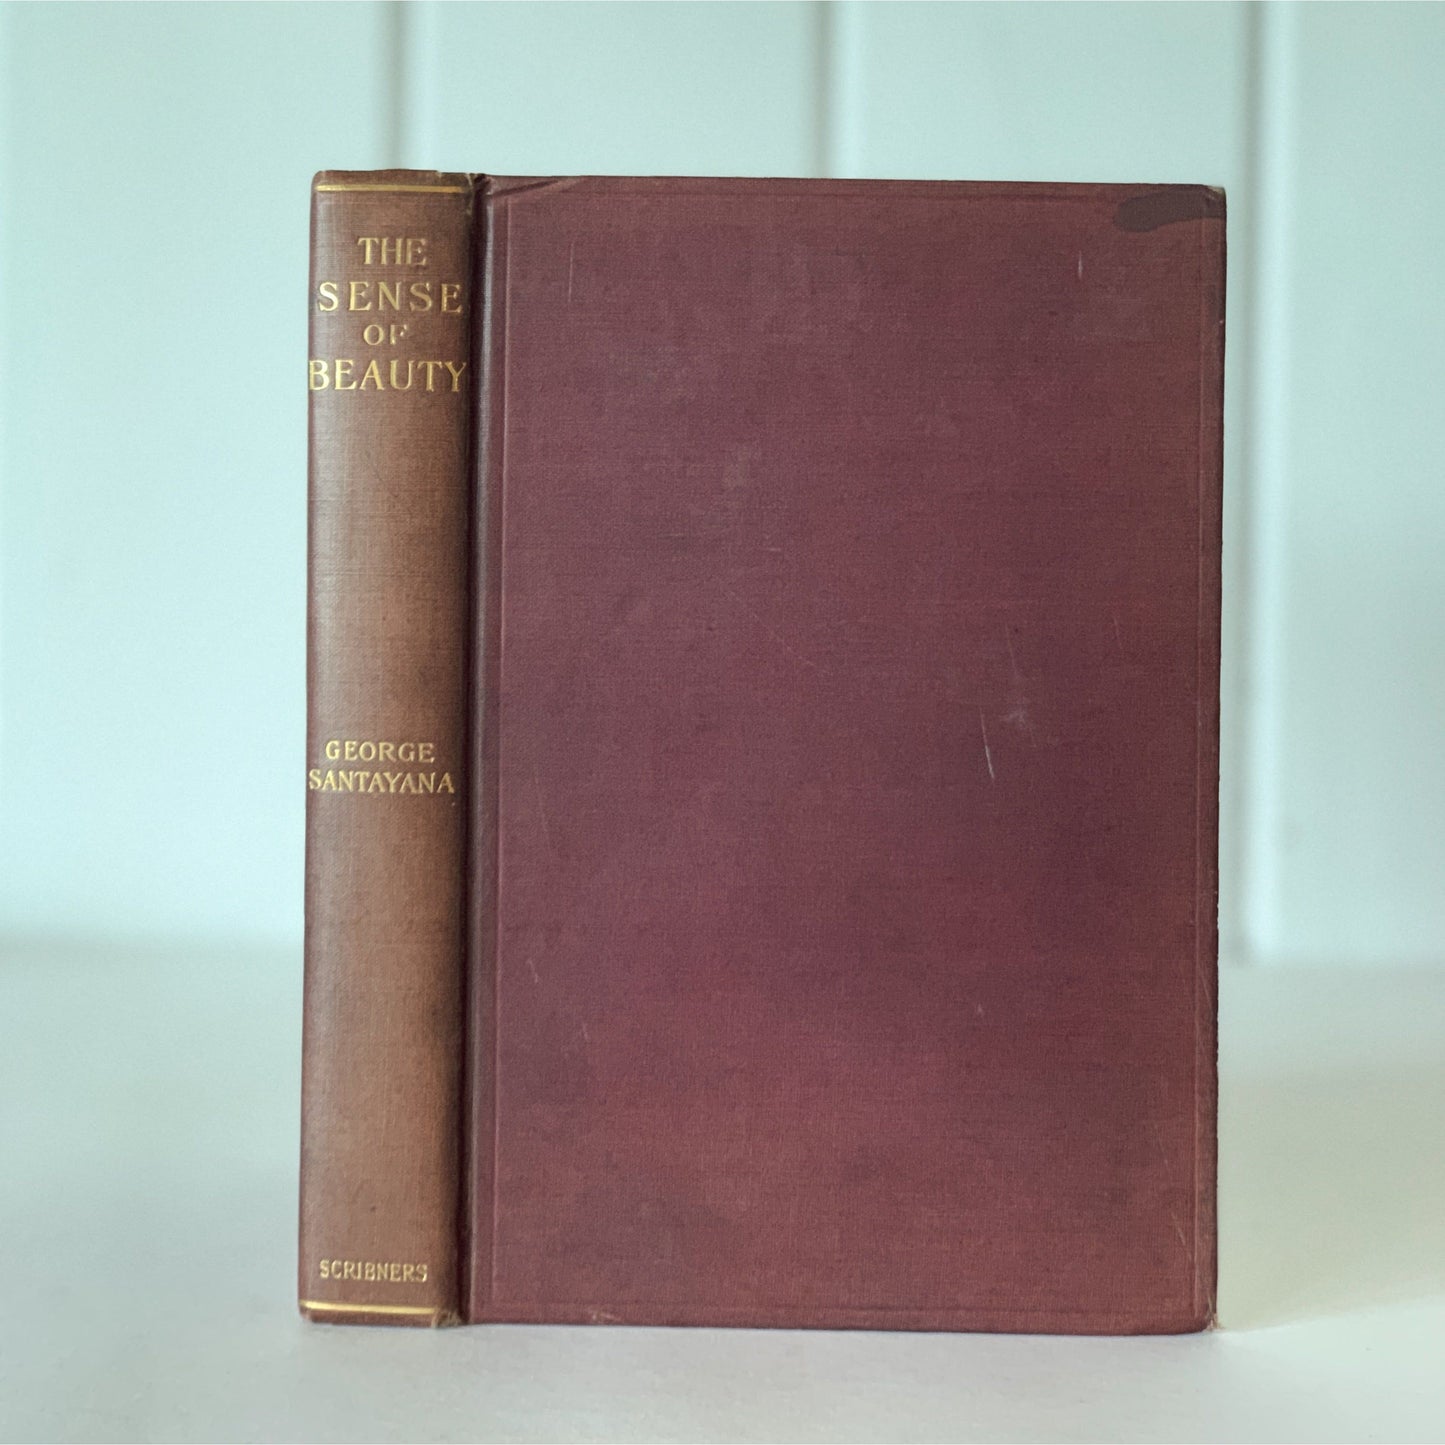 The Sense of Beauty, George Santayana, First Edition, 1896